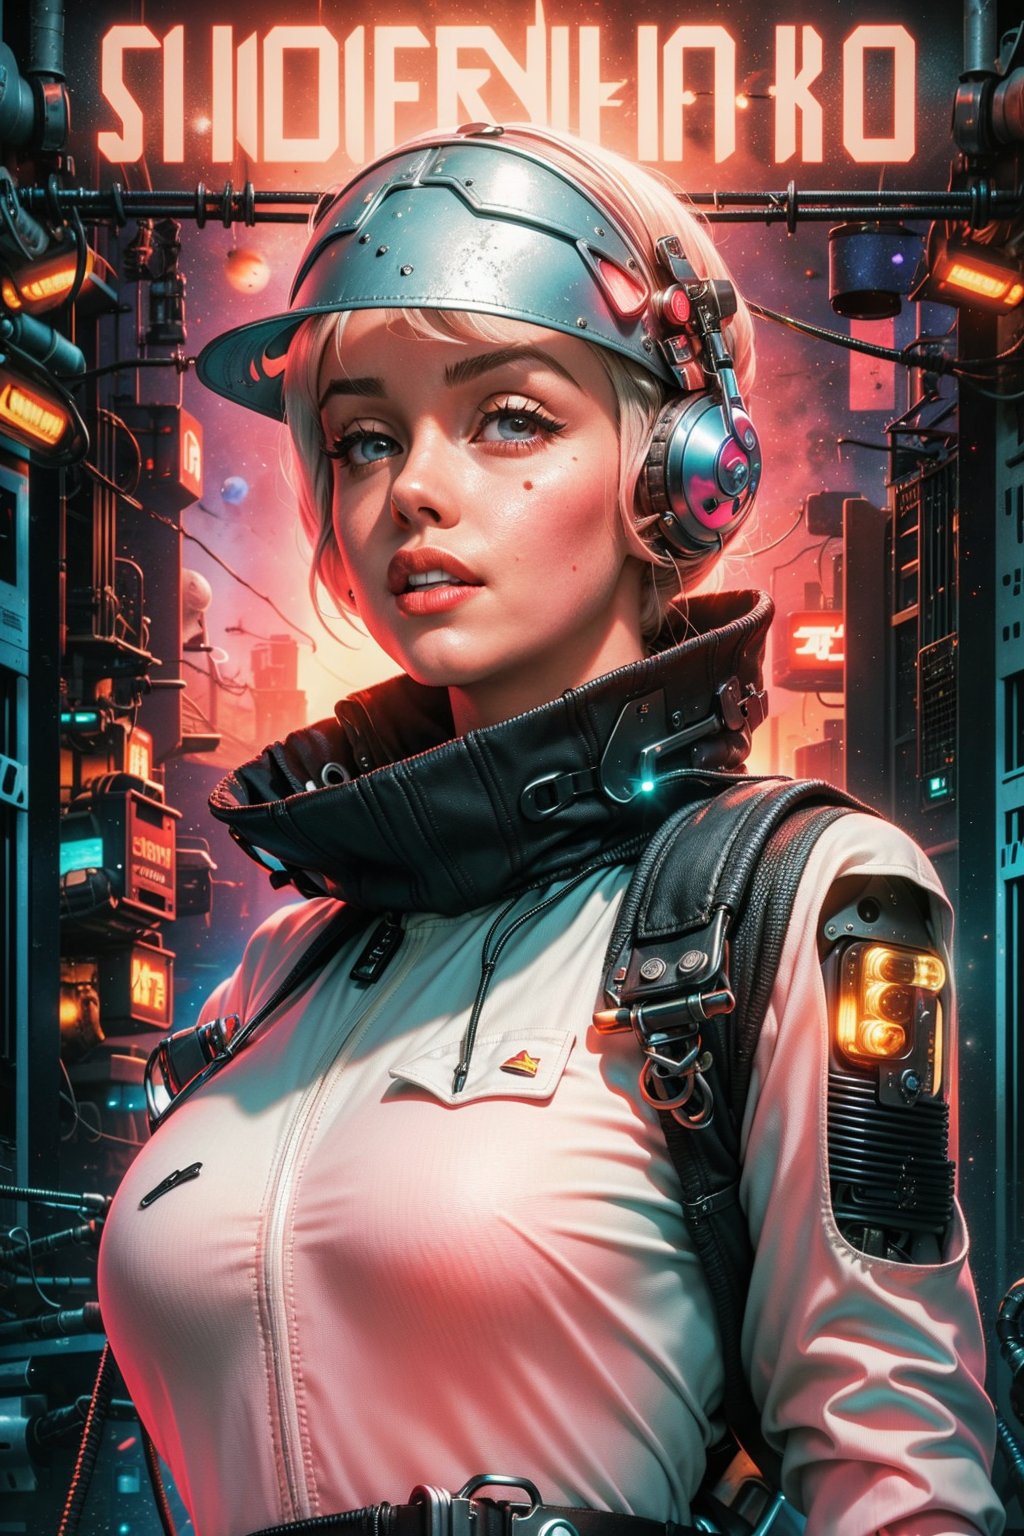 (very sharp focus, bokeh), (Marilyn Monroe), (grey eyes, beautiful detailed eyes), (portrait, cowboy shot), (solo, 1_girl), cyberpunk, neon lights, (white hair), (big fleshy lips:1.4), reddened cheeks, birthmarks:0.5, (huge breasts:1.2), navel, (narrow chest, thin waist, wide hips, thick thigh gap, cameltoe:1.3), (casual pink tank top, crop top:1.3), (white pants, low waist, visible thong, g-string:1.2), (space suit, cyber armor, futuristic clothes:1.3), (dark, night:1.1), (robotic dump, junkyard, metal scraps, wire, cables, fence:1.3), (propaganda poster, plakat, futurism, portrait:1.3)